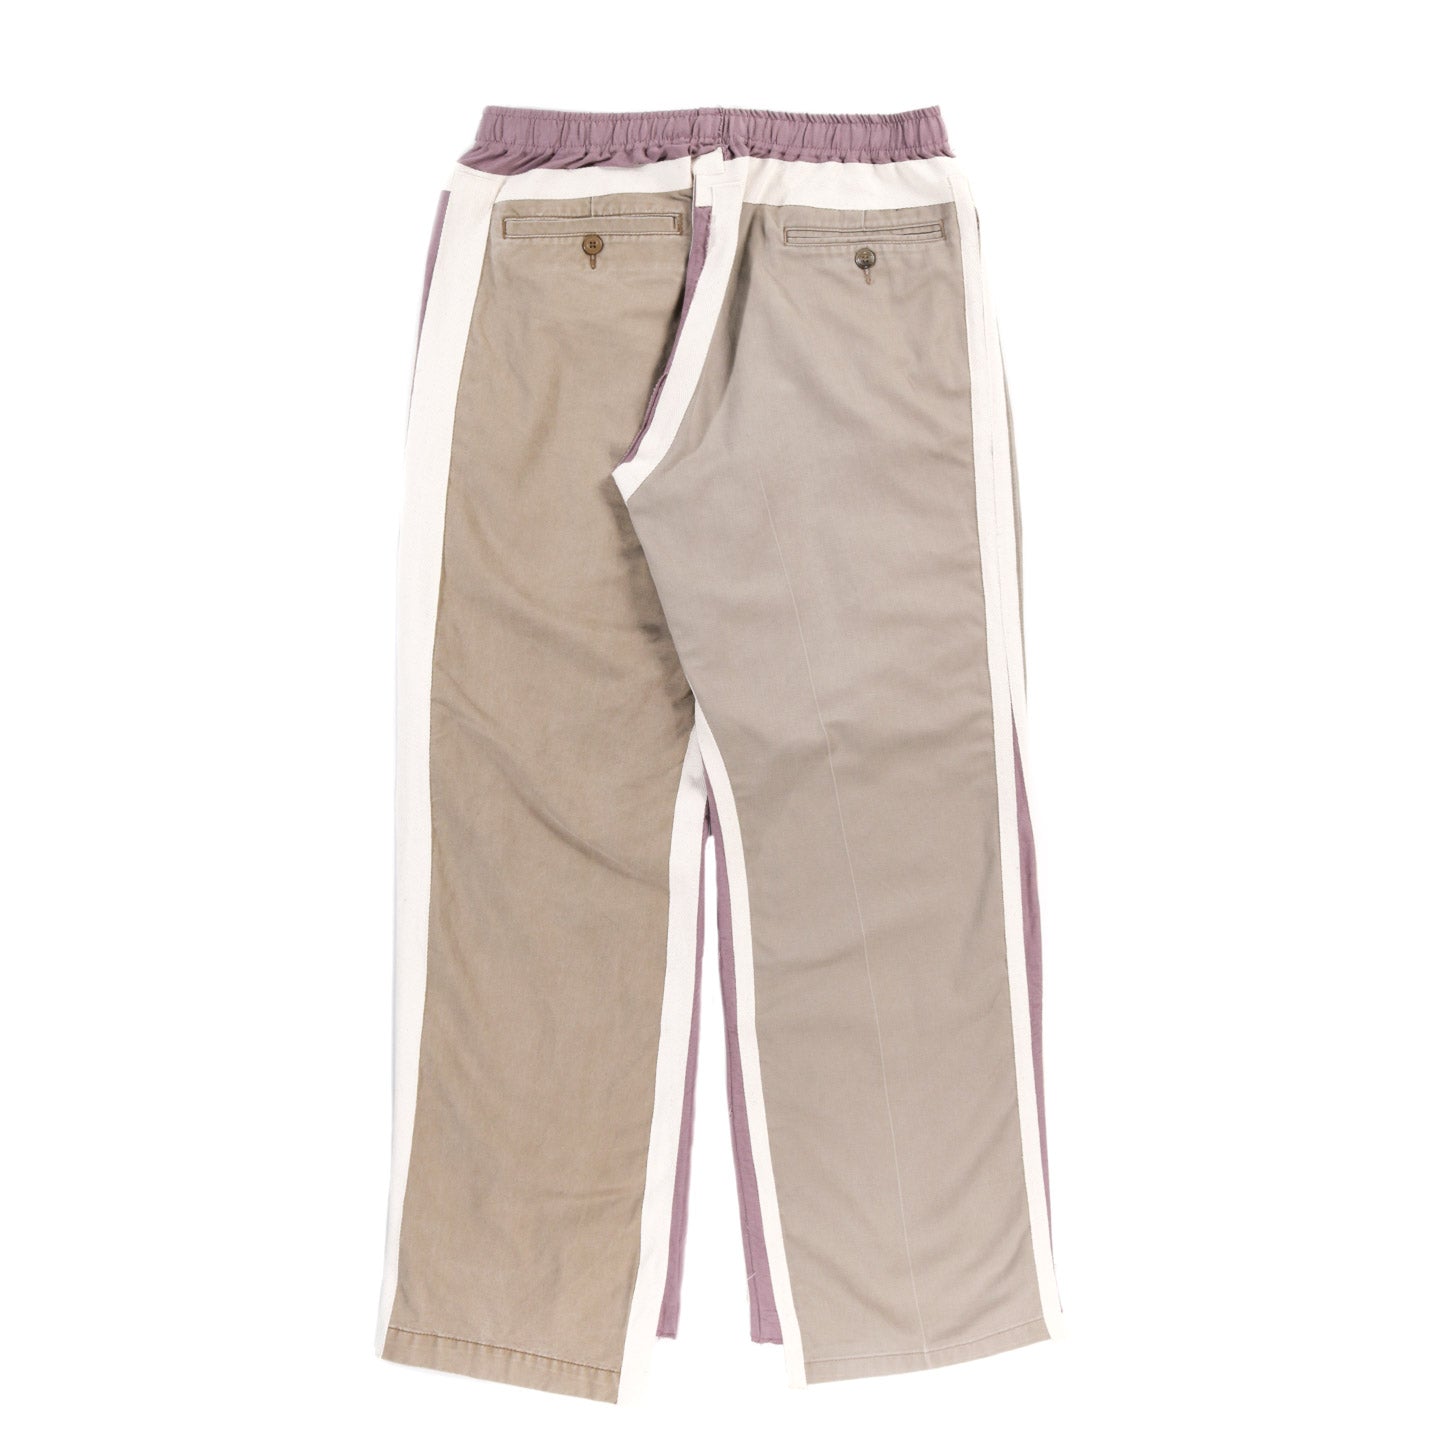 REBUILD BY NEEDLES CHINO COVERED PANT SALMON - S (A)